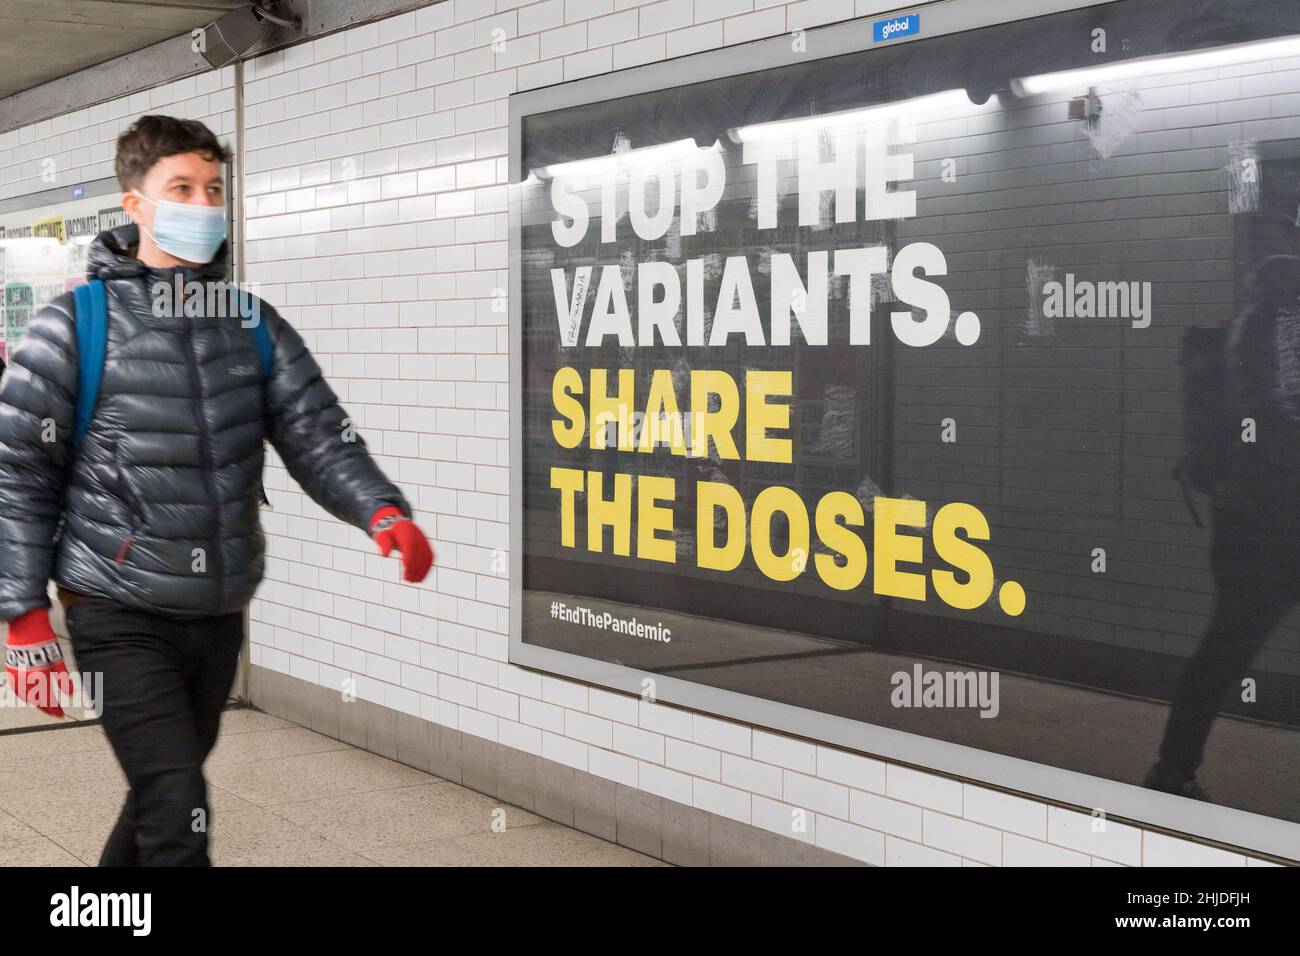 a man in face mask walks past huge poster on the billboard showing 'Stop the variants share the doses', London England UK Stock Photo